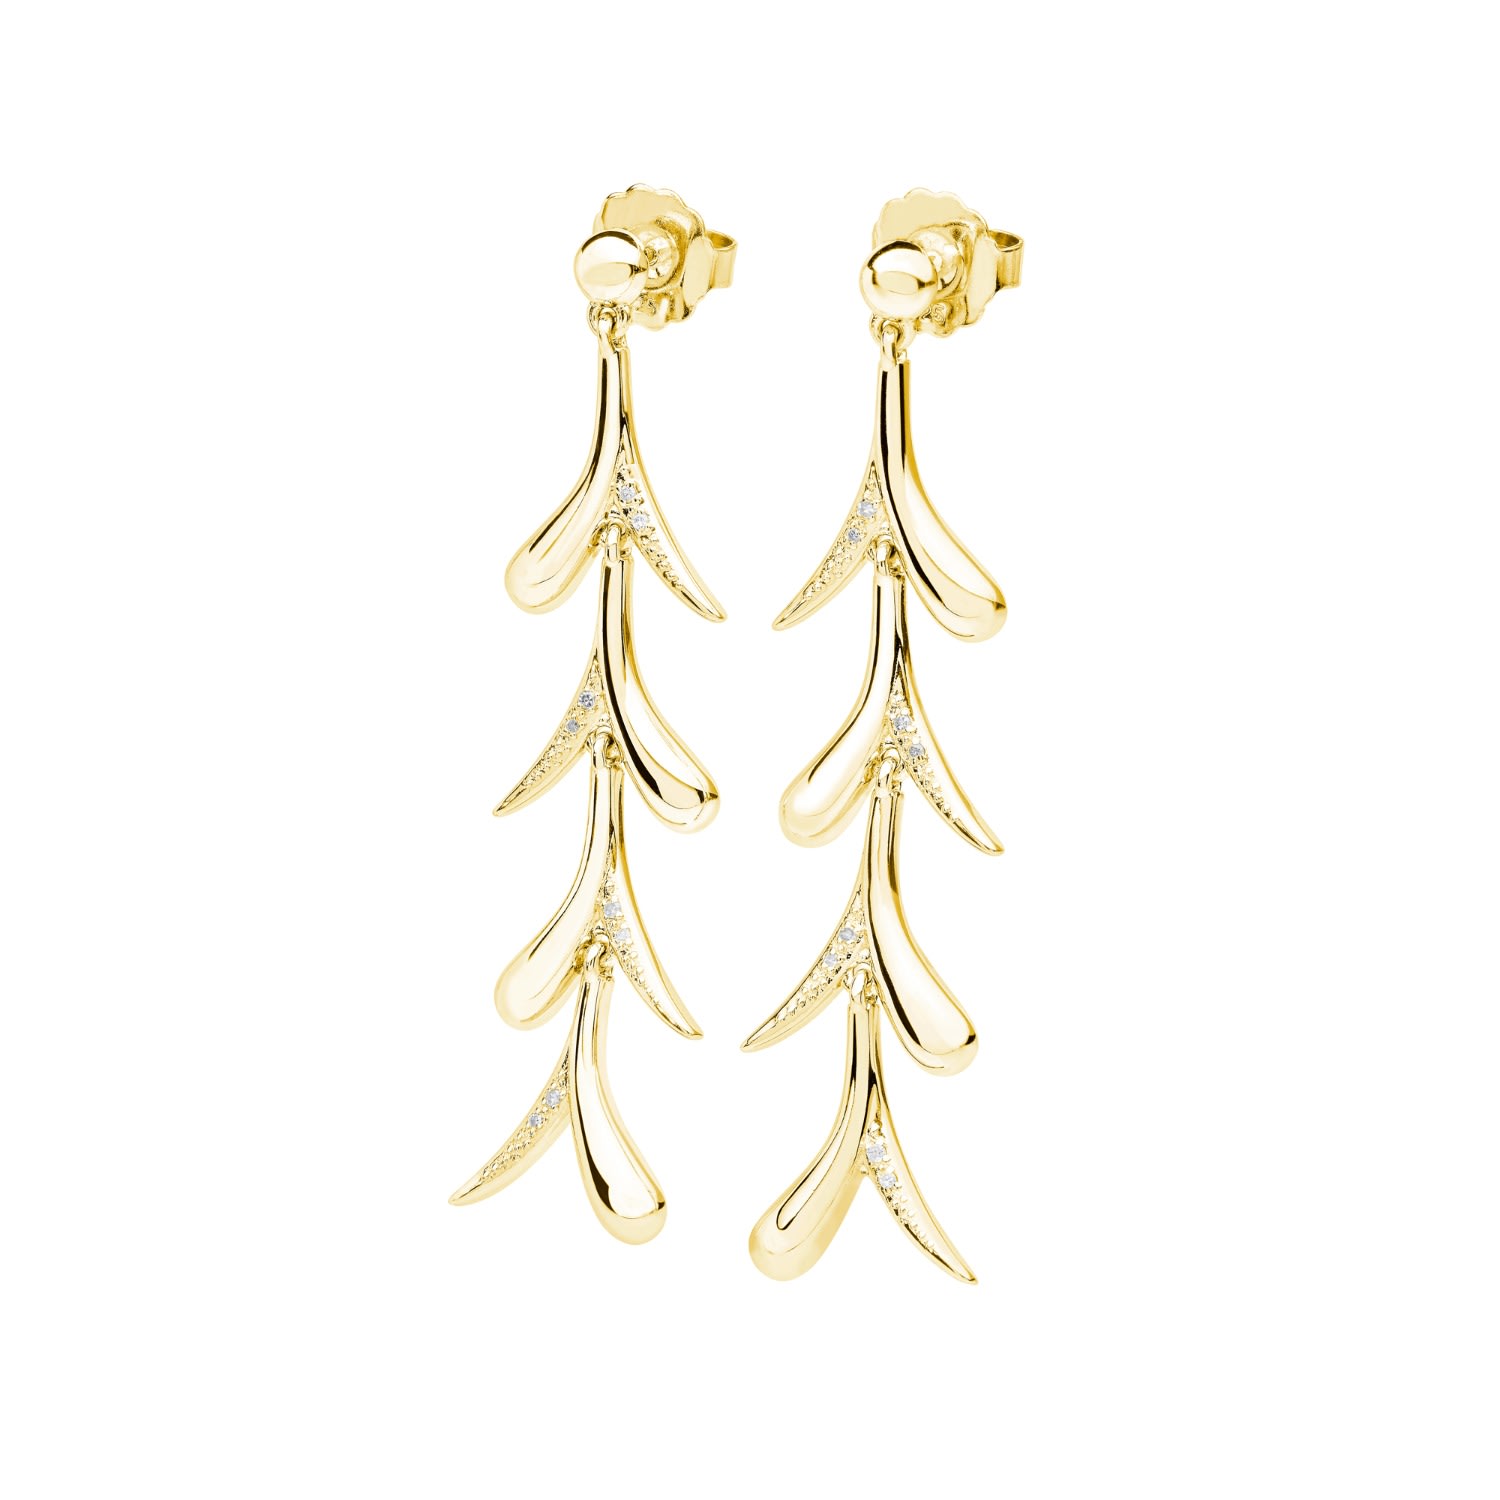 Lucy Quartermaine Women's Sycamore Earrings In Gold Vermeil